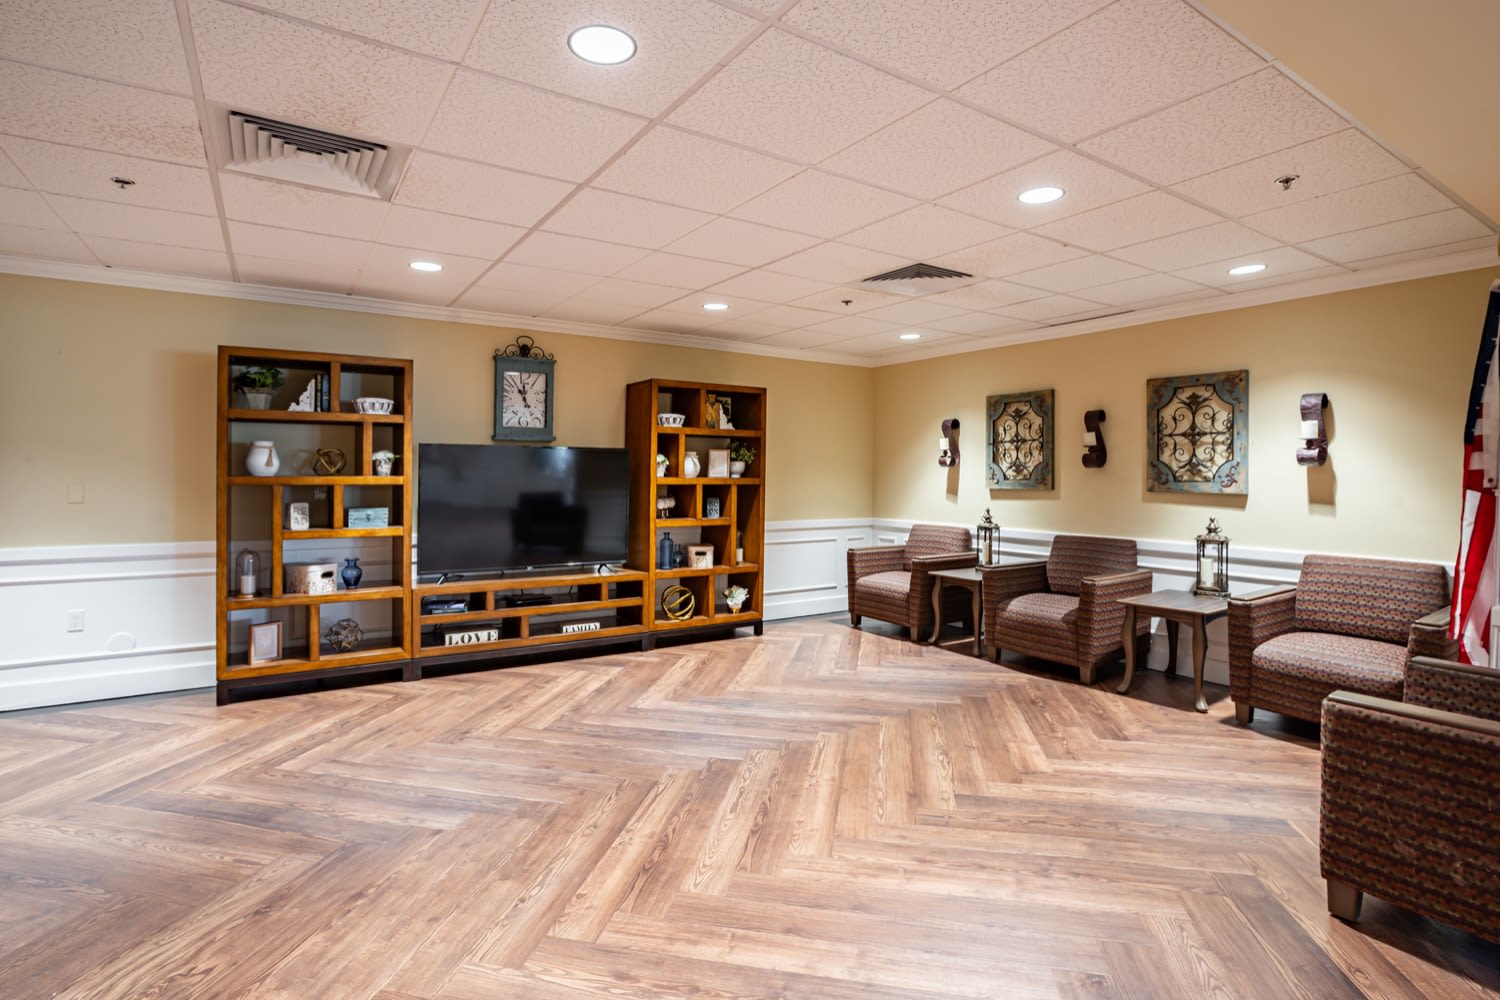 Big Common Area with television at Grand Villa of Deerfield Beach in Deerfield Beach, Florida